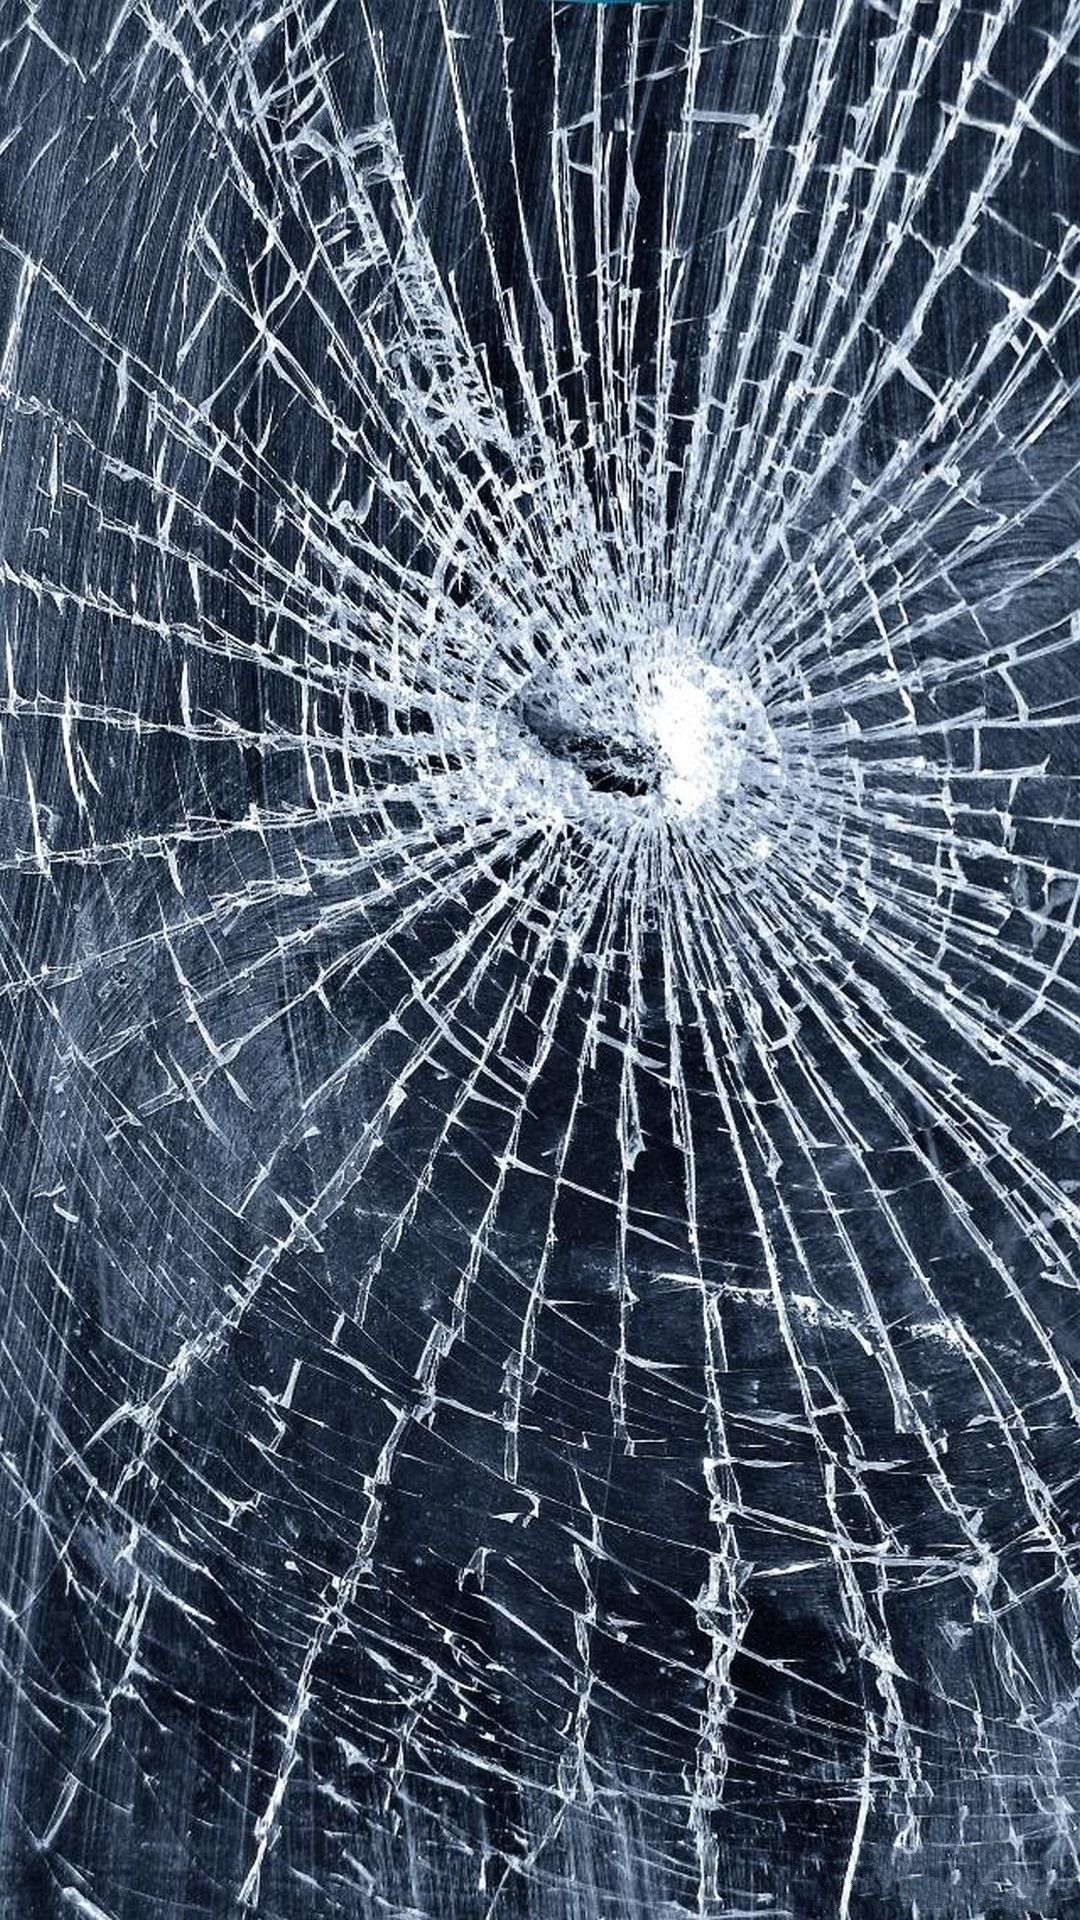 10 Top Cracked Screen Wallpaper Android FULL HD 1080p For PC